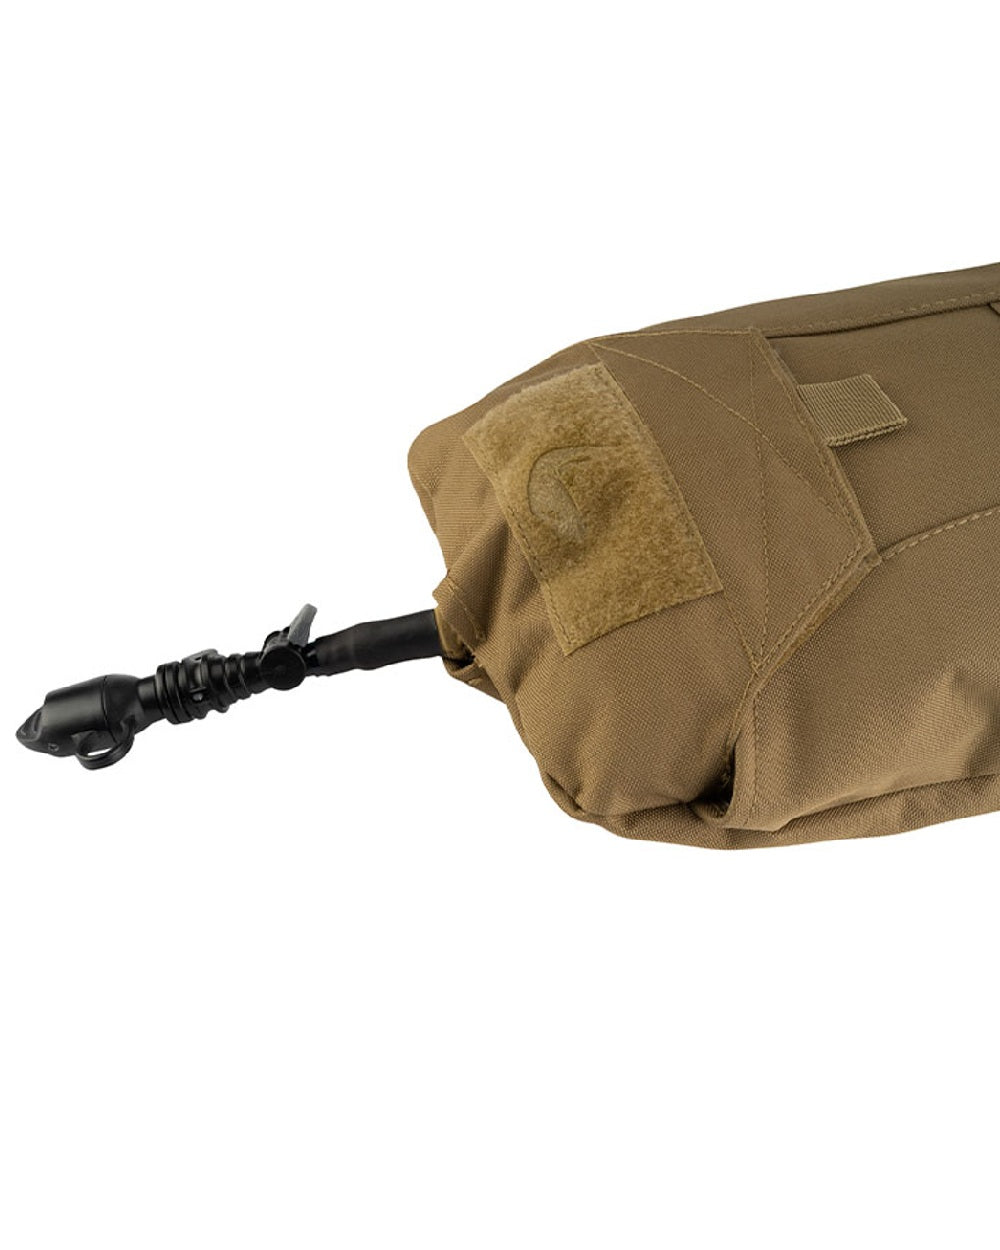 Viper Modular Hydration Pack in Coyote 